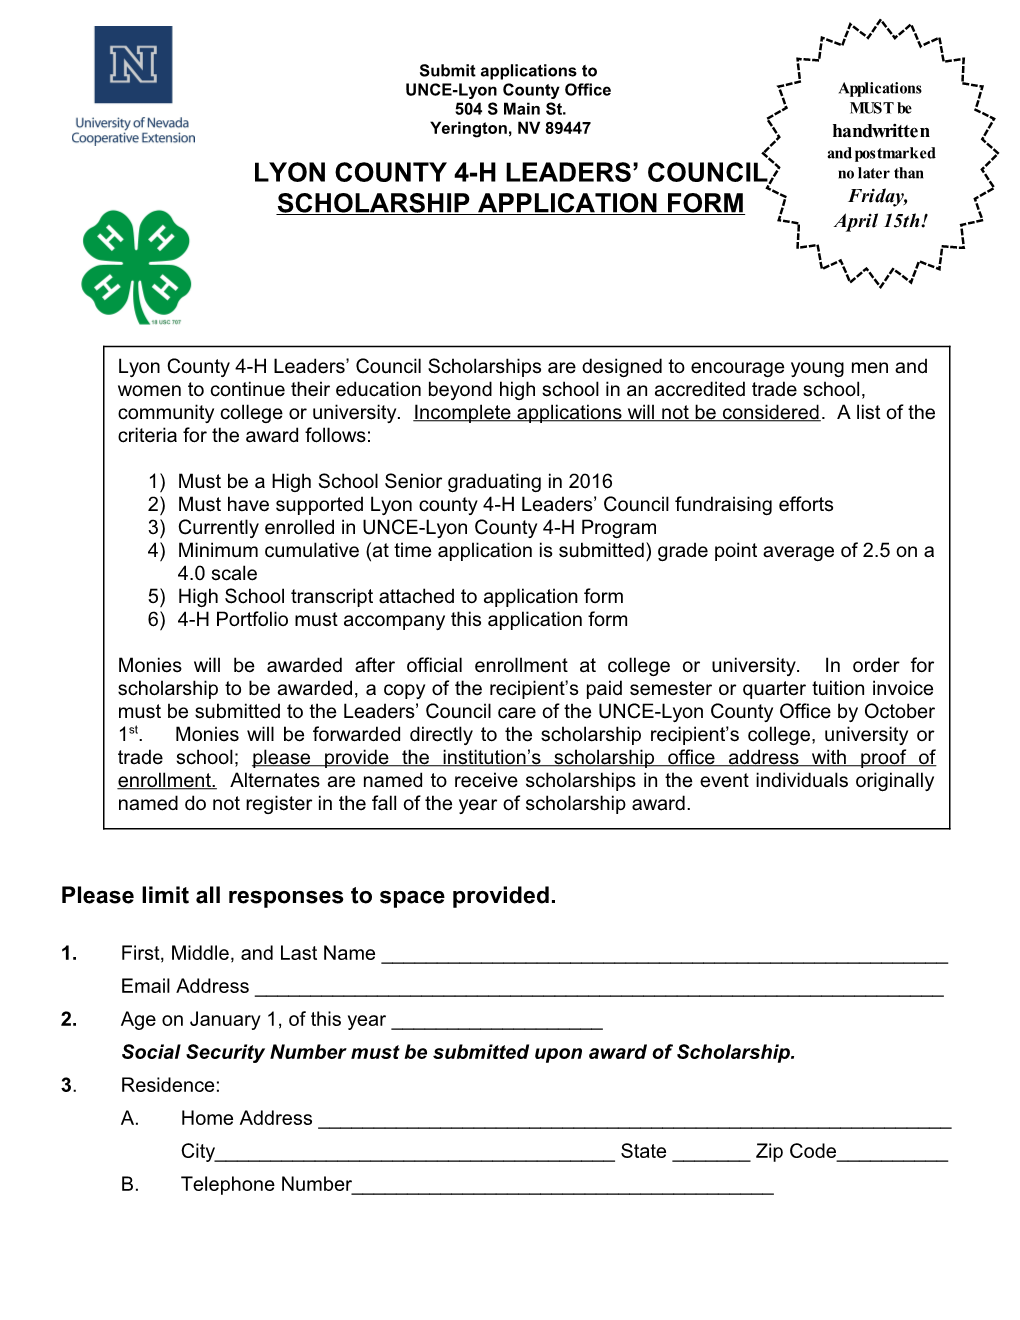 Applications Due Into the Extension Office by April 17, 2006